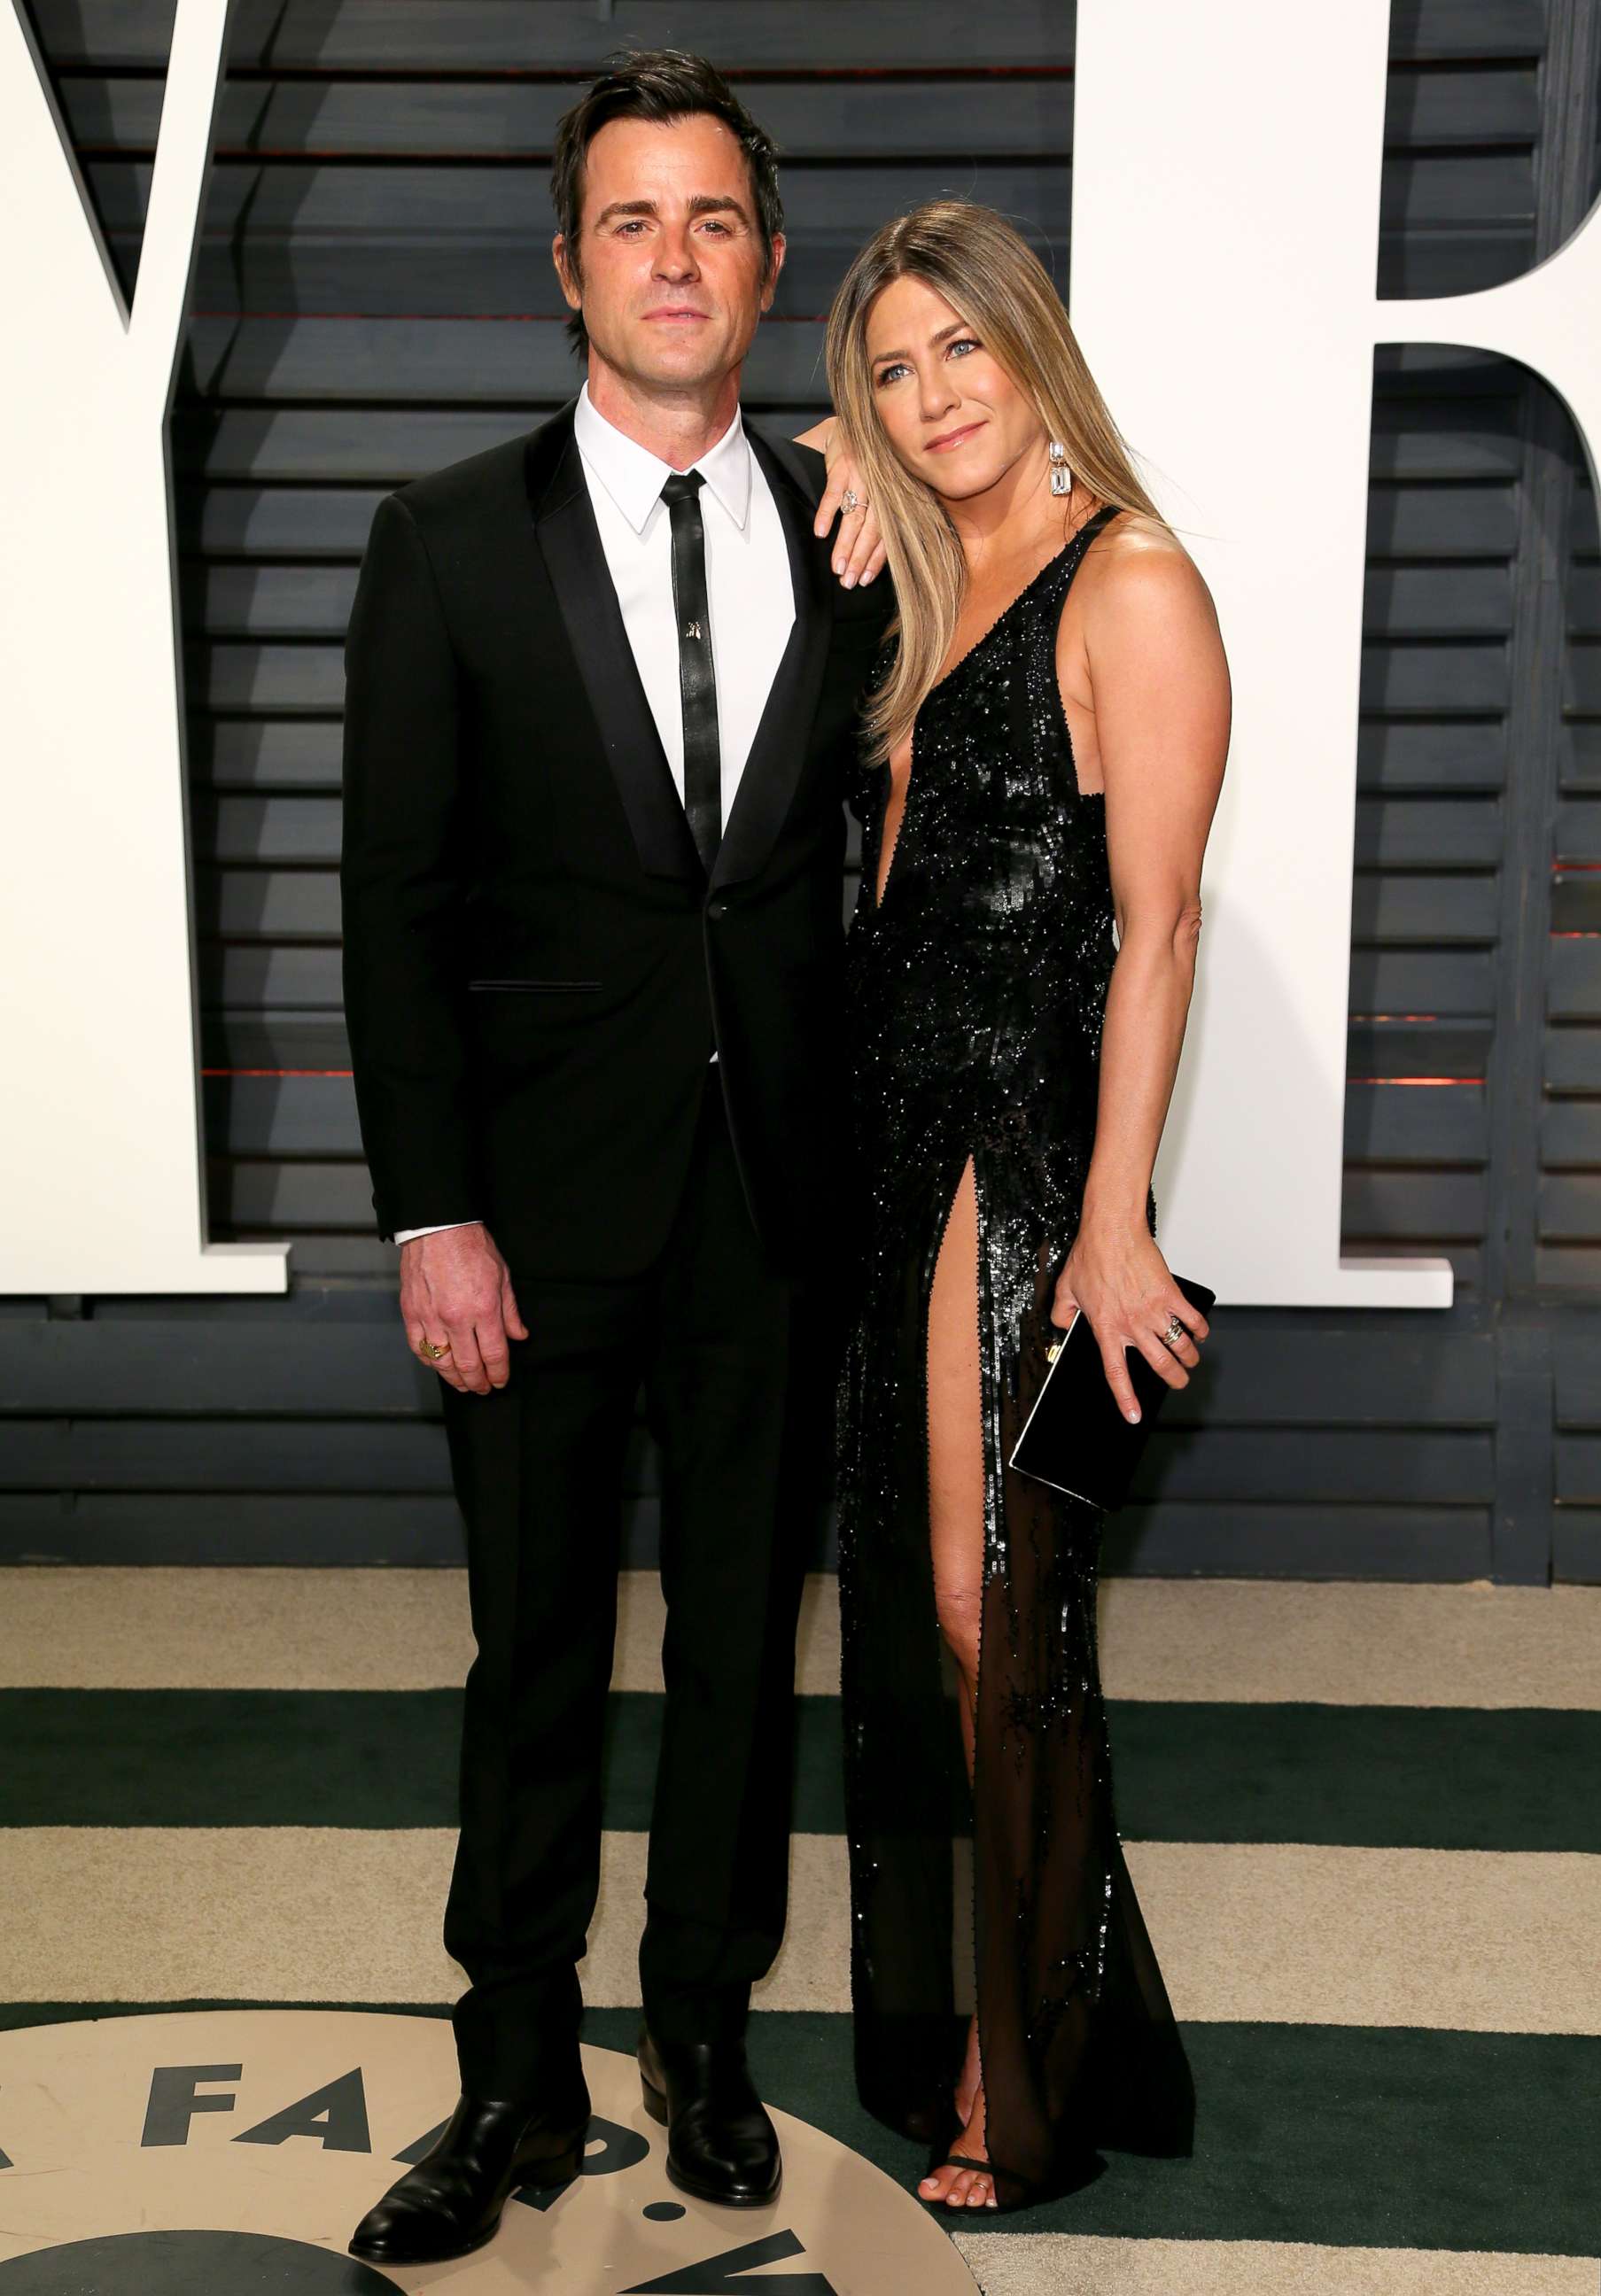 PHOTO: Jennifer Aniston and Justin Theroux attend the 2017 Vanity Fair Oscar Party, Feb. 26, 2017, in Beverly Hills, Calif.